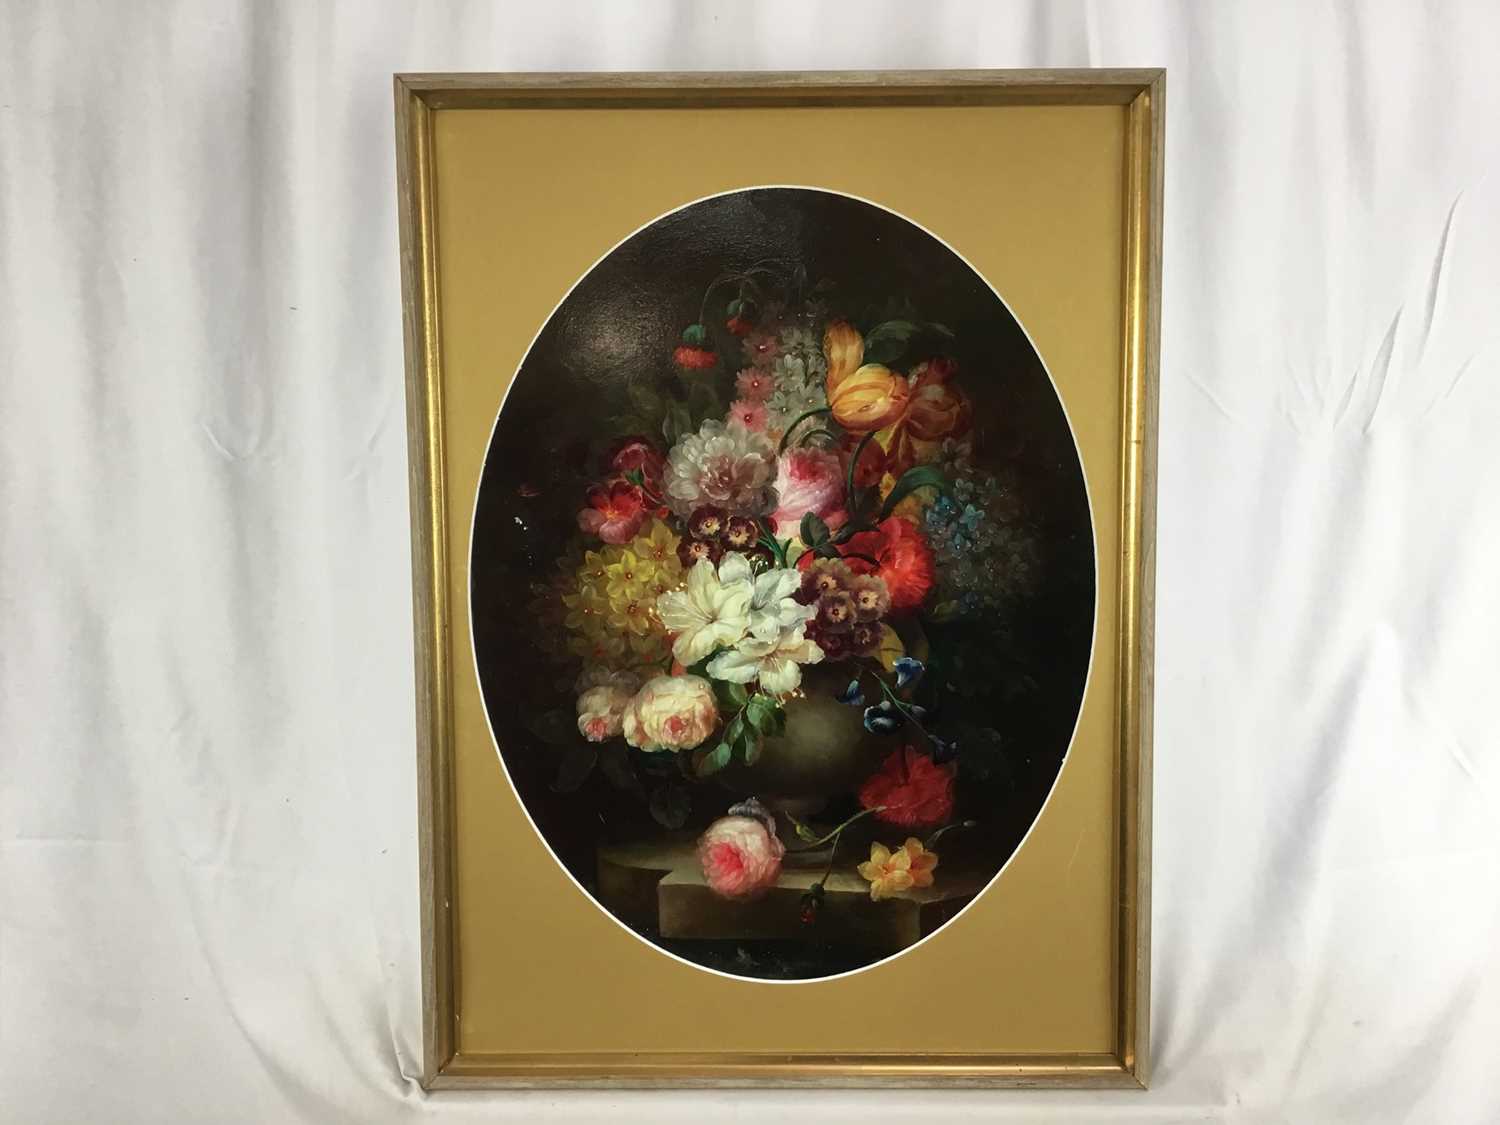 Attributed to Emilio Greco oil on wood board - still life with urn, framed - Image 2 of 6